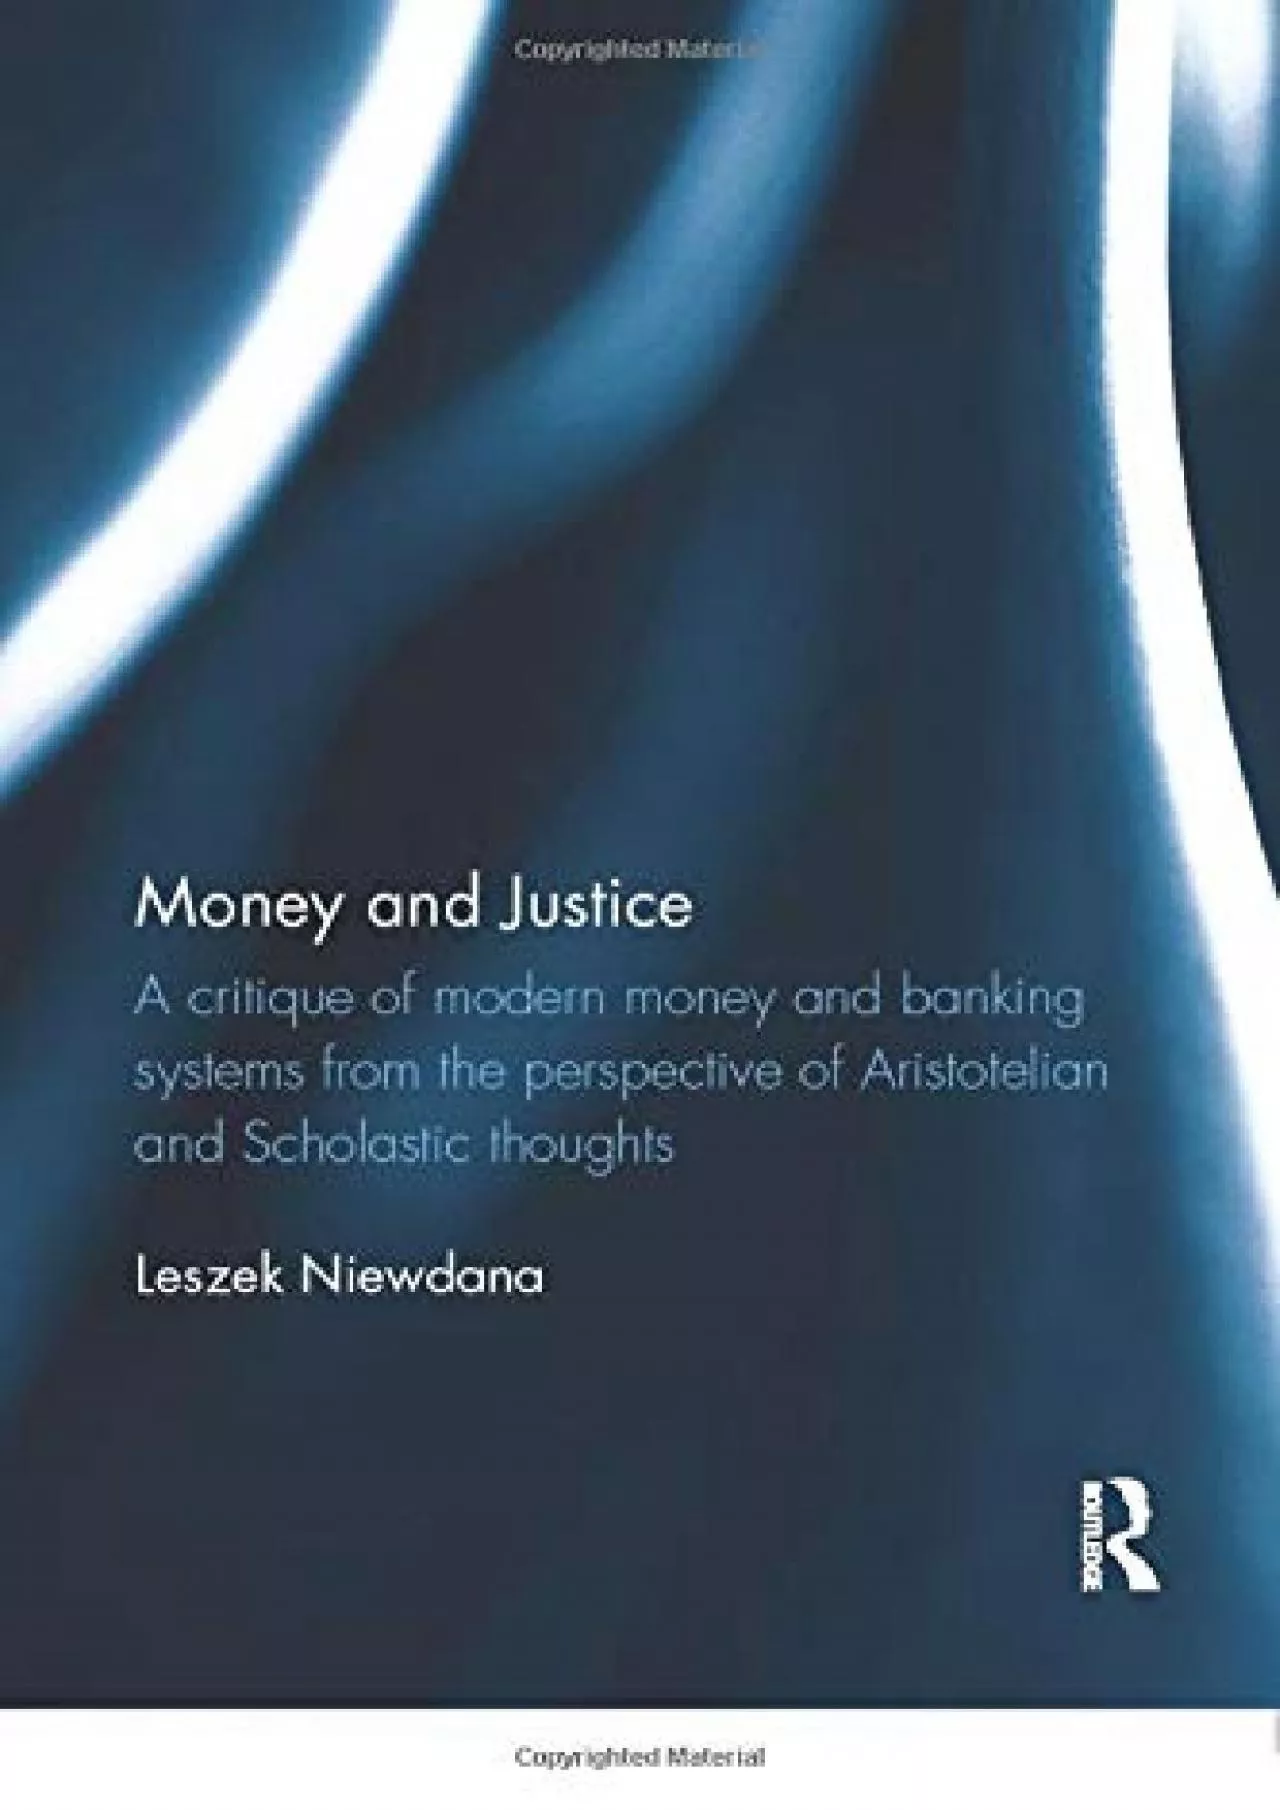 (DOWNLOAD)-Money and Justice: A critique of modern money and banking systems from the